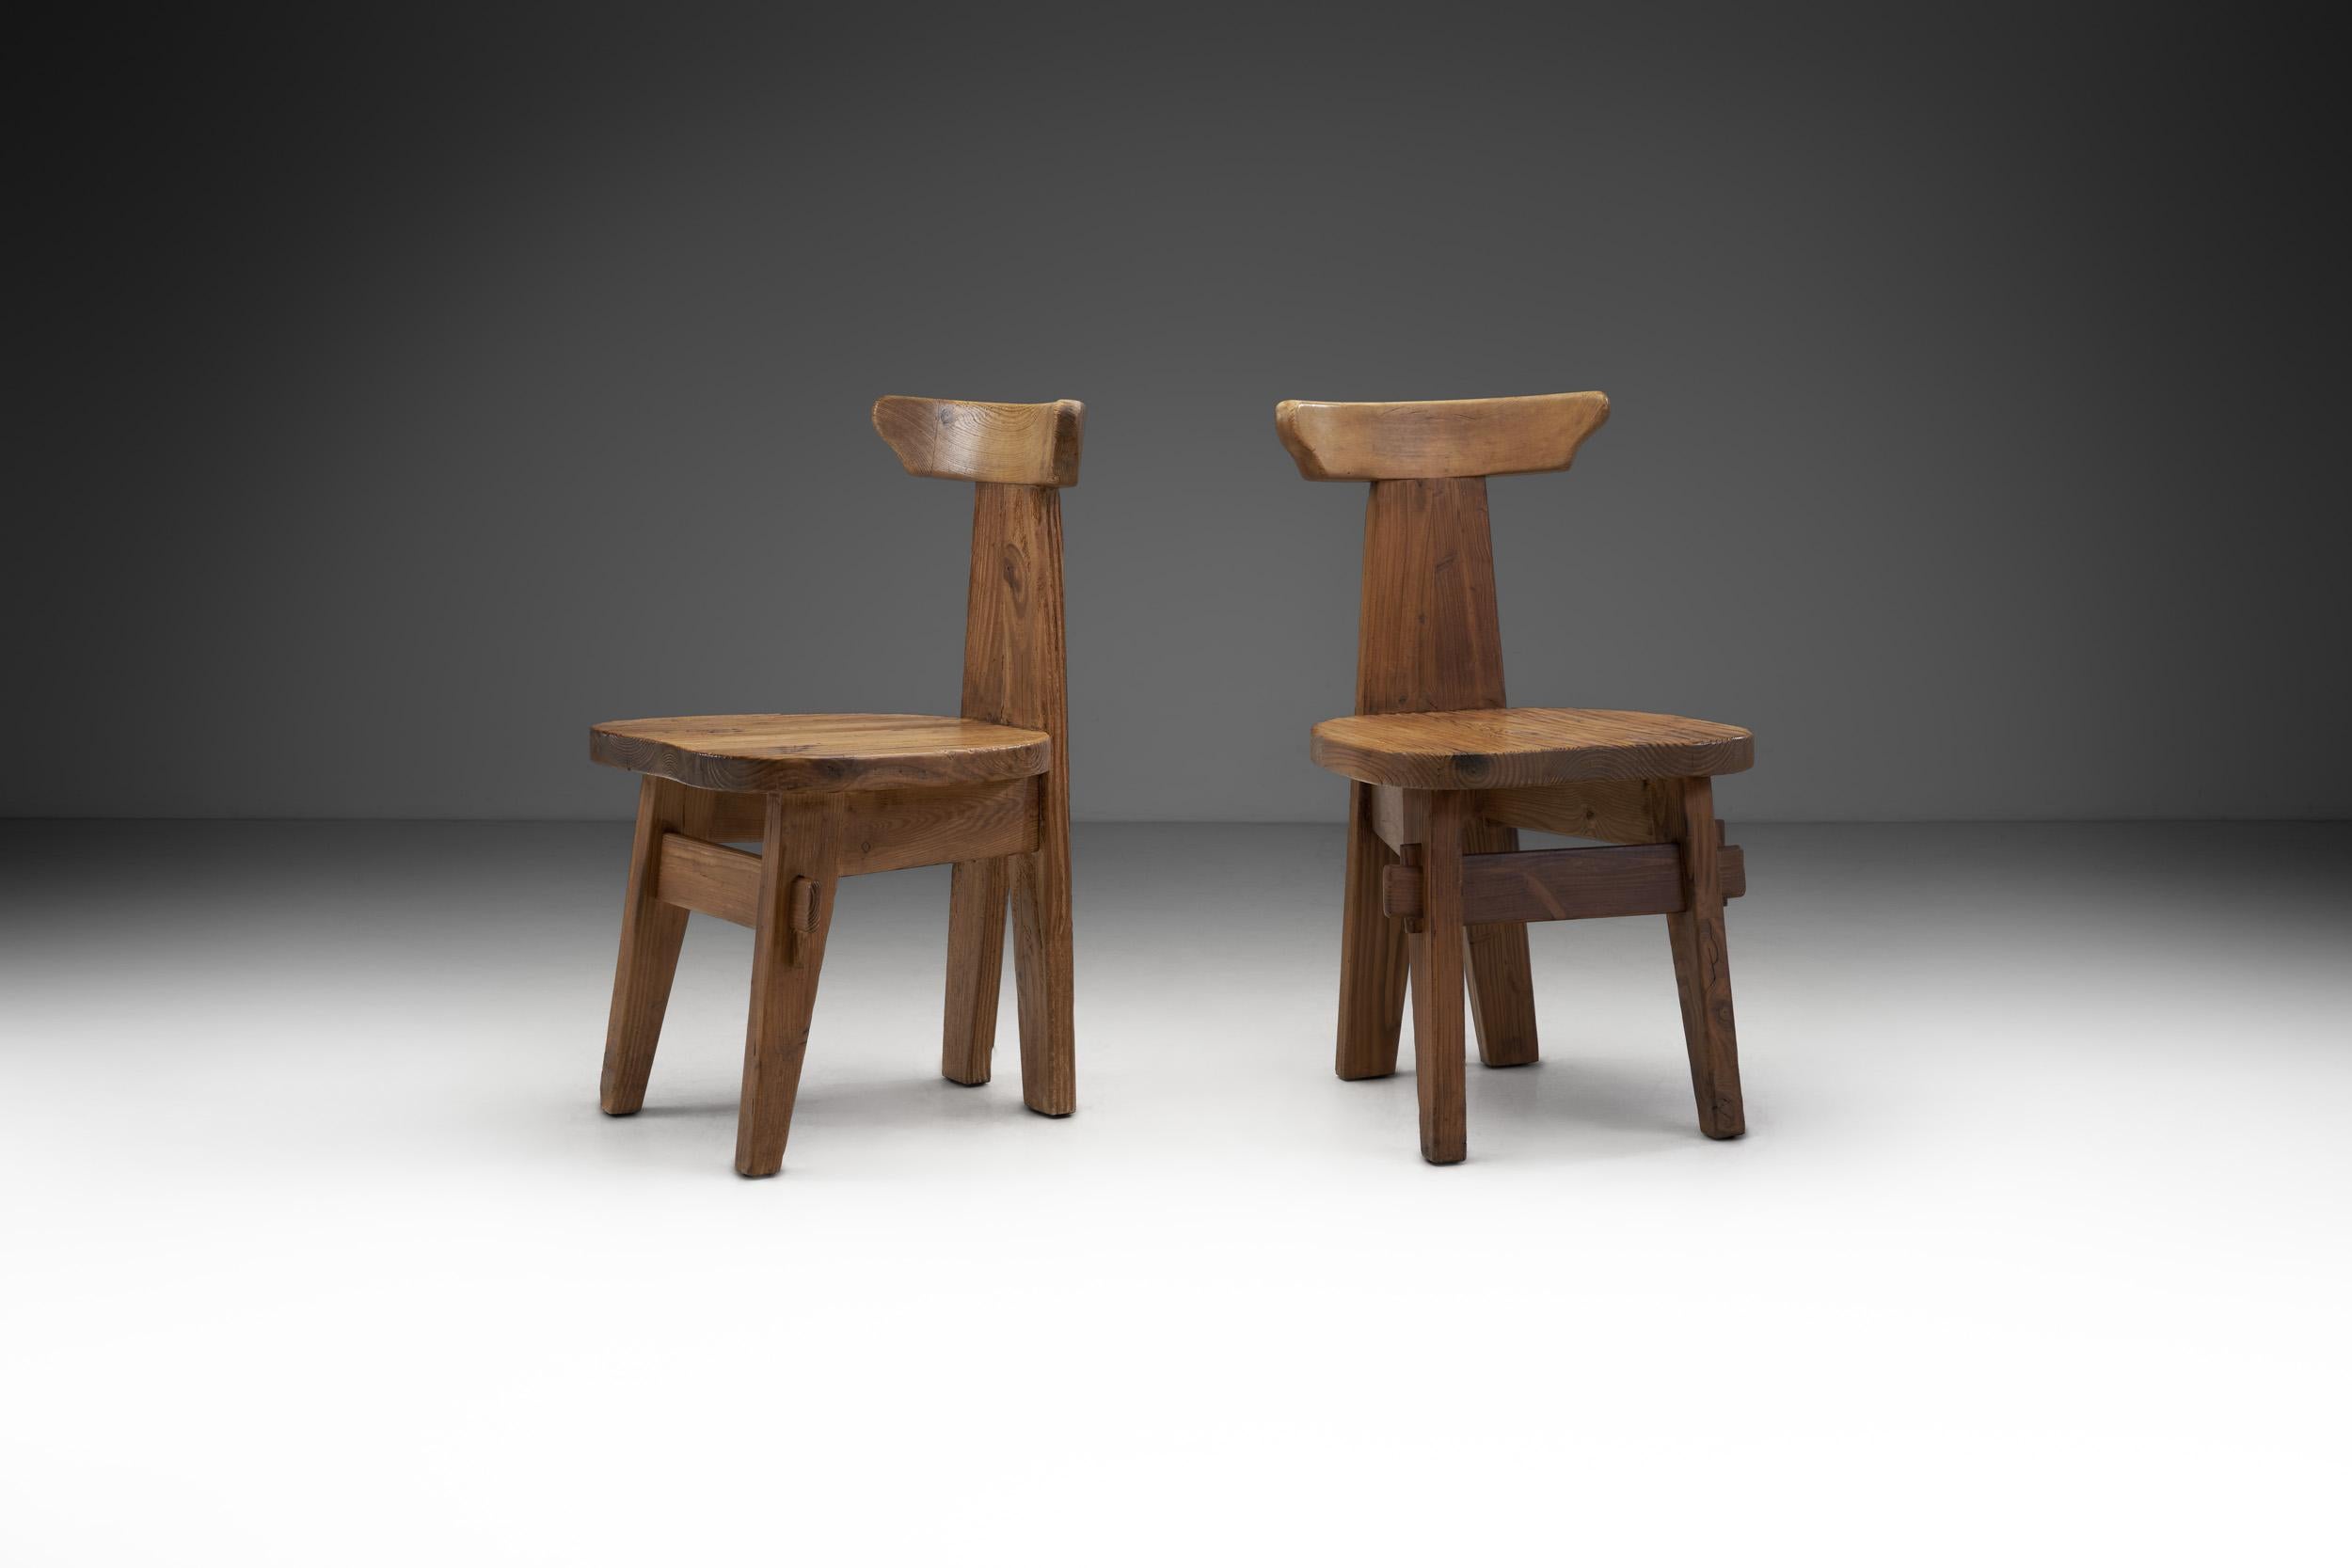 As a descendant of the modernist movement of the late 19th century and the first half of the 20th century, Brutalism favoured celebrating the imperfect appeal of handmade items. These massive wood chairs have an elemental look aided by the expert